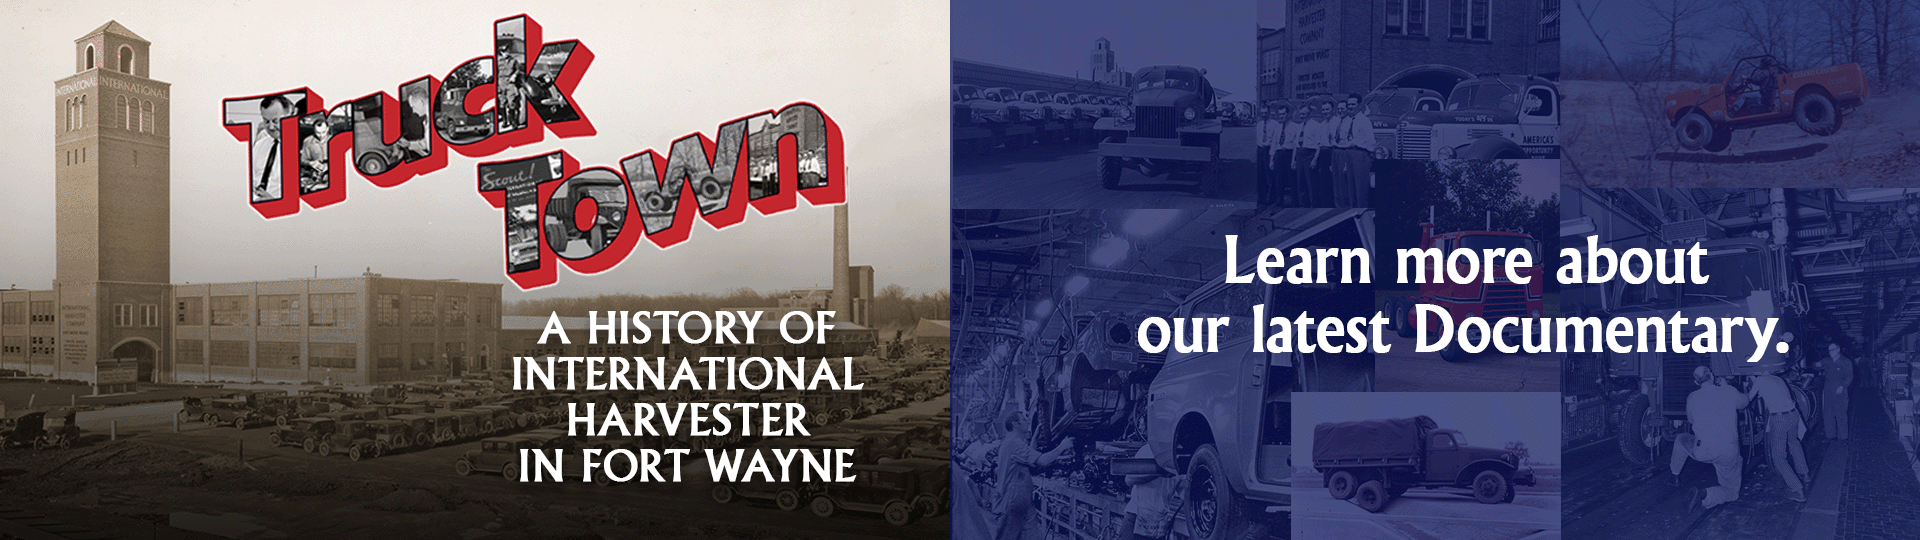 Learn More About Our Latest Doctumentary: TRUCK TOWN: A History of International Harvester in Fort Wayne